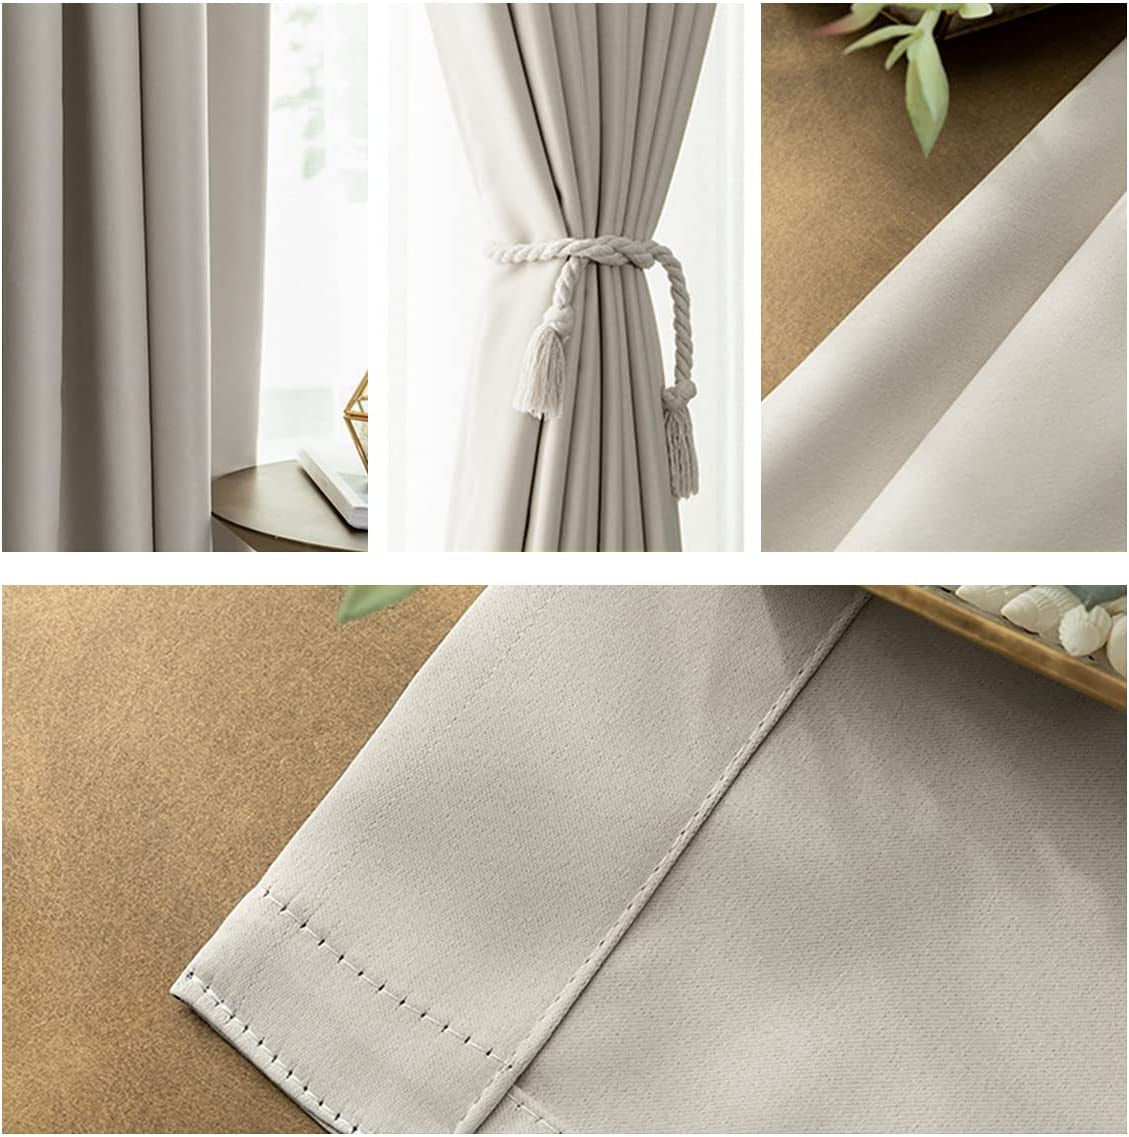 IYUEGO Pinch Pleat Solid Thermal Insulated 95% Blackout Patio Door Curtain Panel Drape for Traverse Rod and Track, Beige 150" W X 84" L (One Panel)  I Love Curtains   